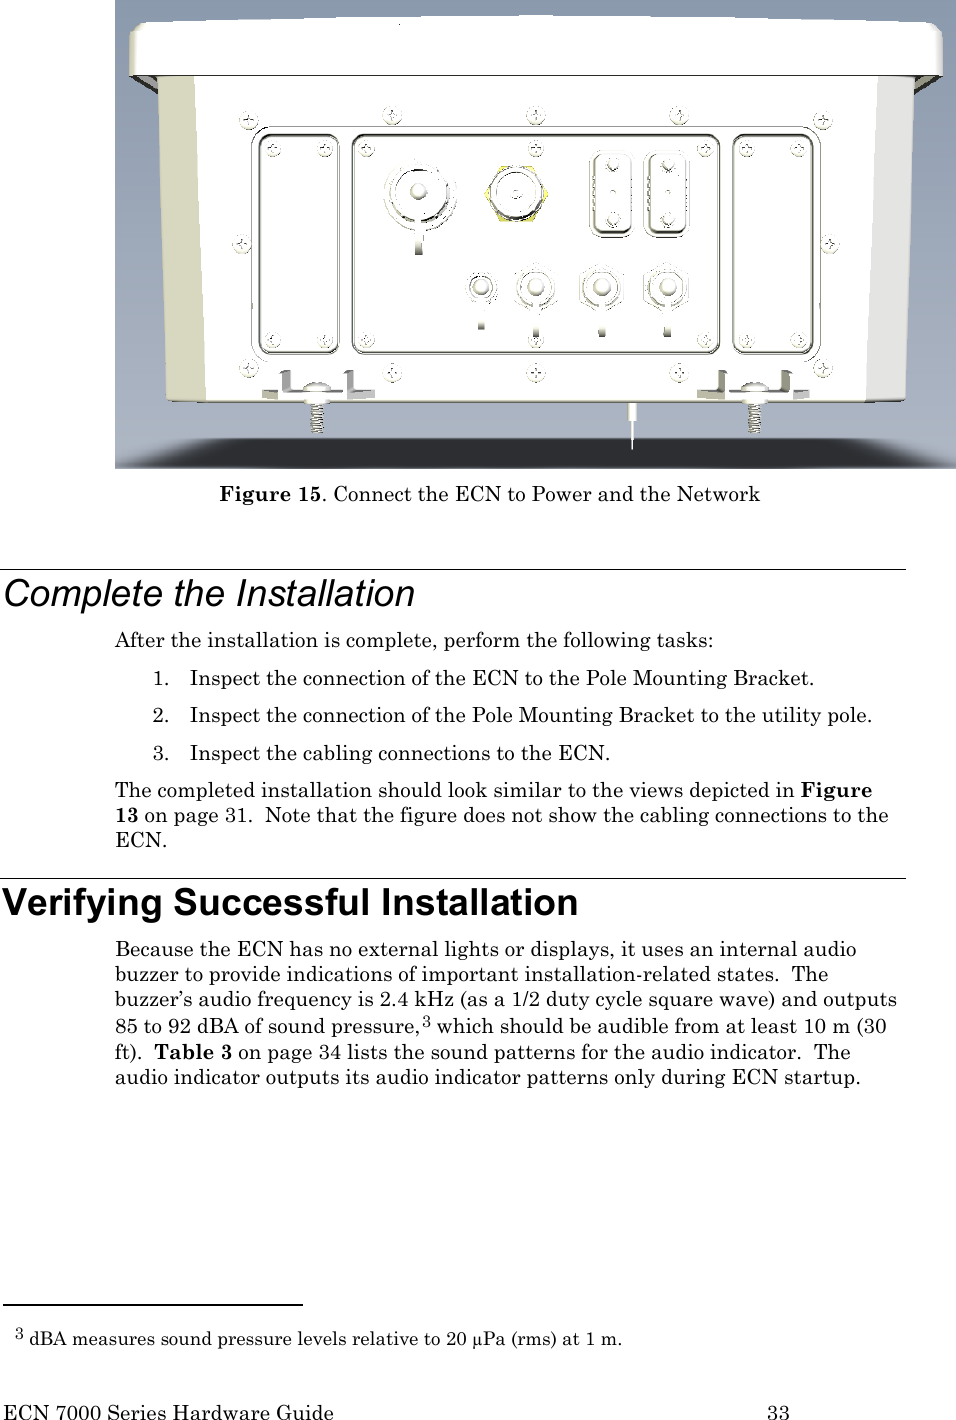  ECN 7000 Series Hardware Guide        33  Figure 15. Connect the ECN to Power and the Network  Complete the Installation After the installation is complete, perform the following tasks: 1. Inspect the connection of the ECN to the Pole Mounting Bracket. 2. Inspect the connection of the Pole Mounting Bracket to the utility pole. 3. Inspect the cabling connections to the ECN. The completed installation should look similar to the views depicted in Figure 13 on page 31.  Note that the figure does not show the cabling connections to the ECN. Verifying Successful Installation Because the ECN has no external lights or displays, it uses an internal audio buzzer to provide indications of important installation-related states.  The buzzer’s audio frequency is 2.4 kHz (as a 1/2 duty cycle square wave) and outputs 85 to 92 dBA of sound pressure,3 which should be audible from at least 10 m (30 ft).  Table 3 on page 34 lists the sound patterns for the audio indicator.  The audio indicator outputs its audio indicator patterns only during ECN startup.                                                   3 dBA measures sound pressure levels relative to 20 µPa (rms) at 1 m. 